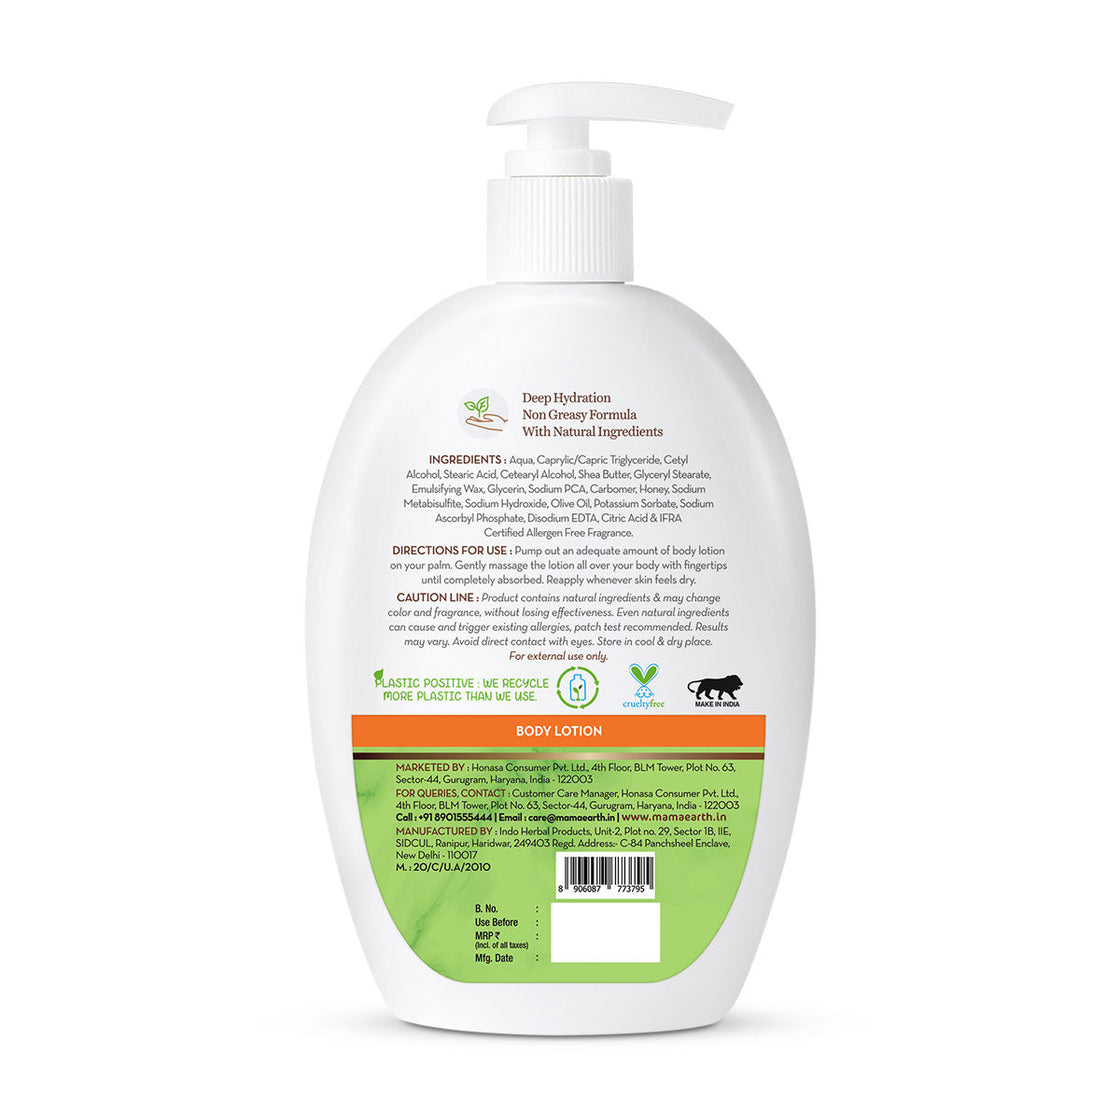 Mamaearth Vitamin C Body Lotion With Vitamin C & Honey For Radiant Skin-3